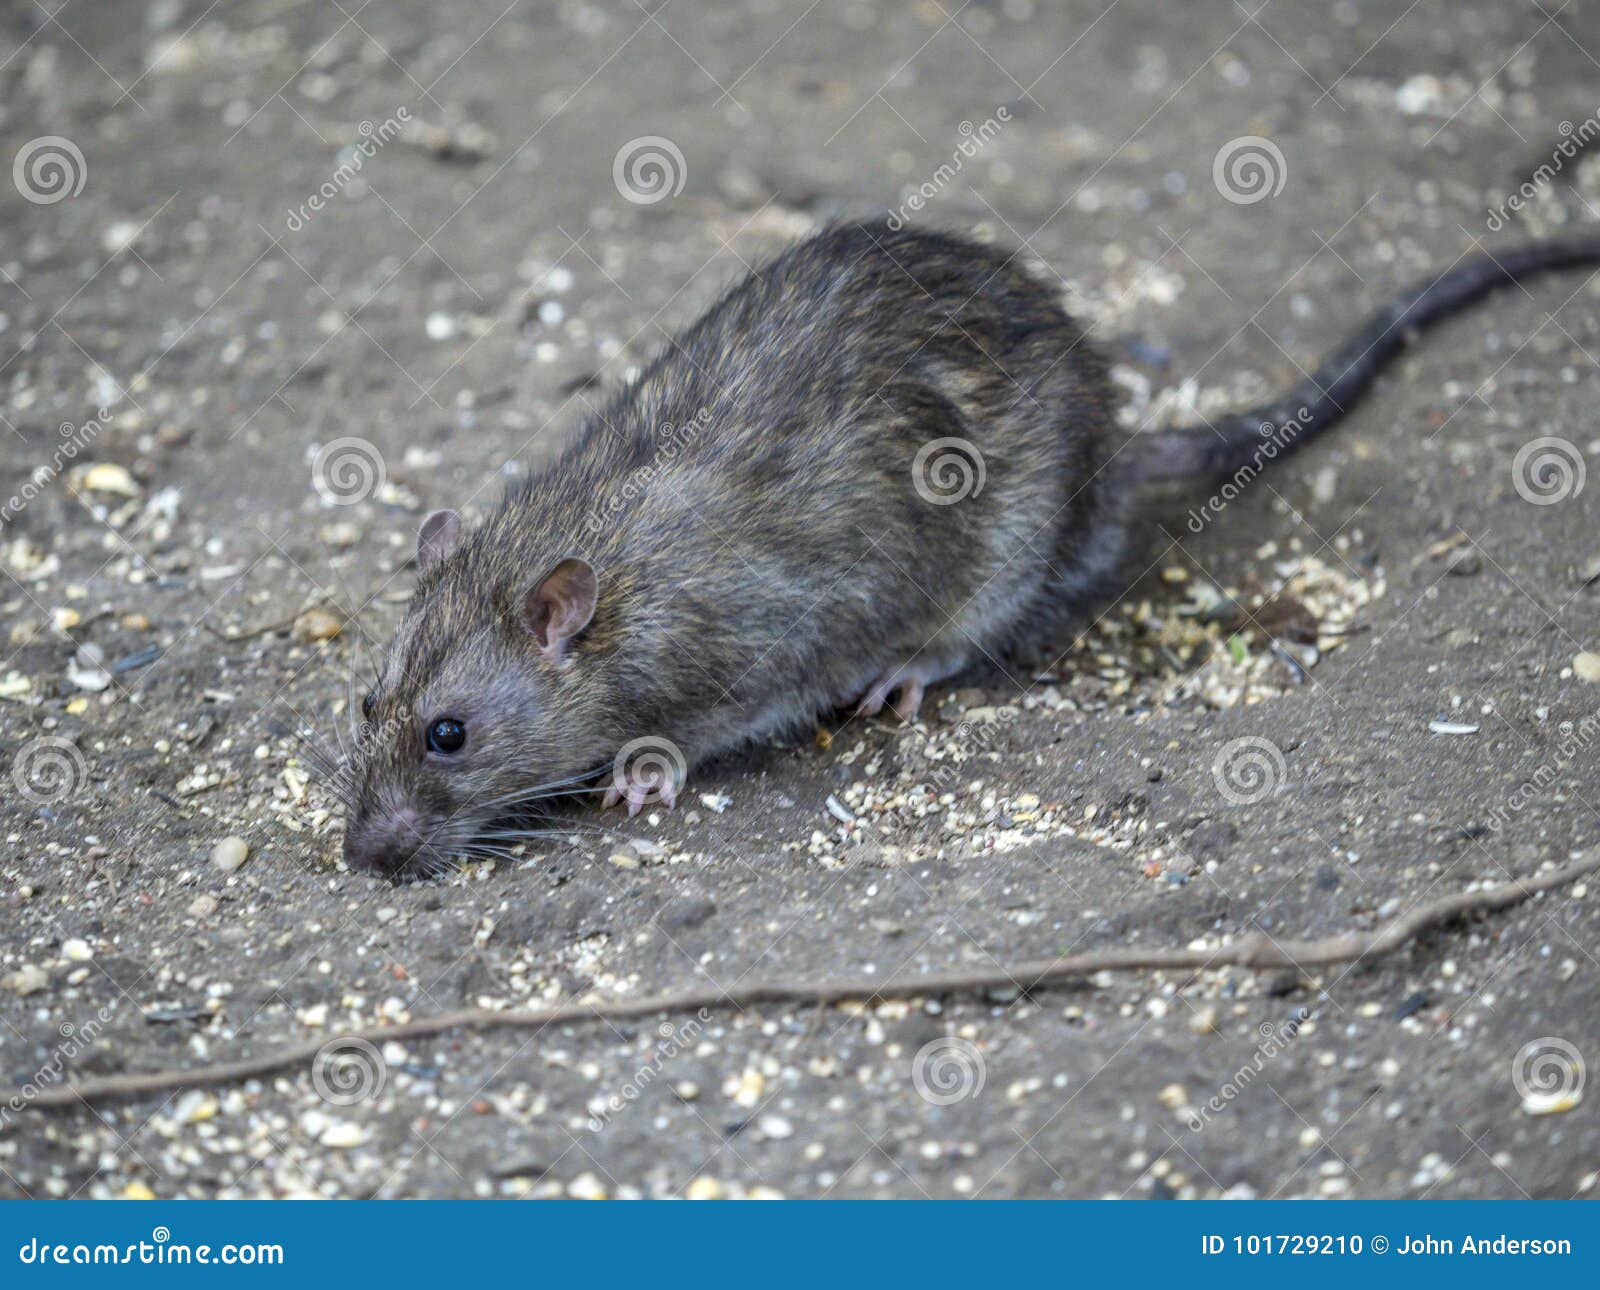 Common brown rat stock photo. Image of rodent, sewer - 101729210